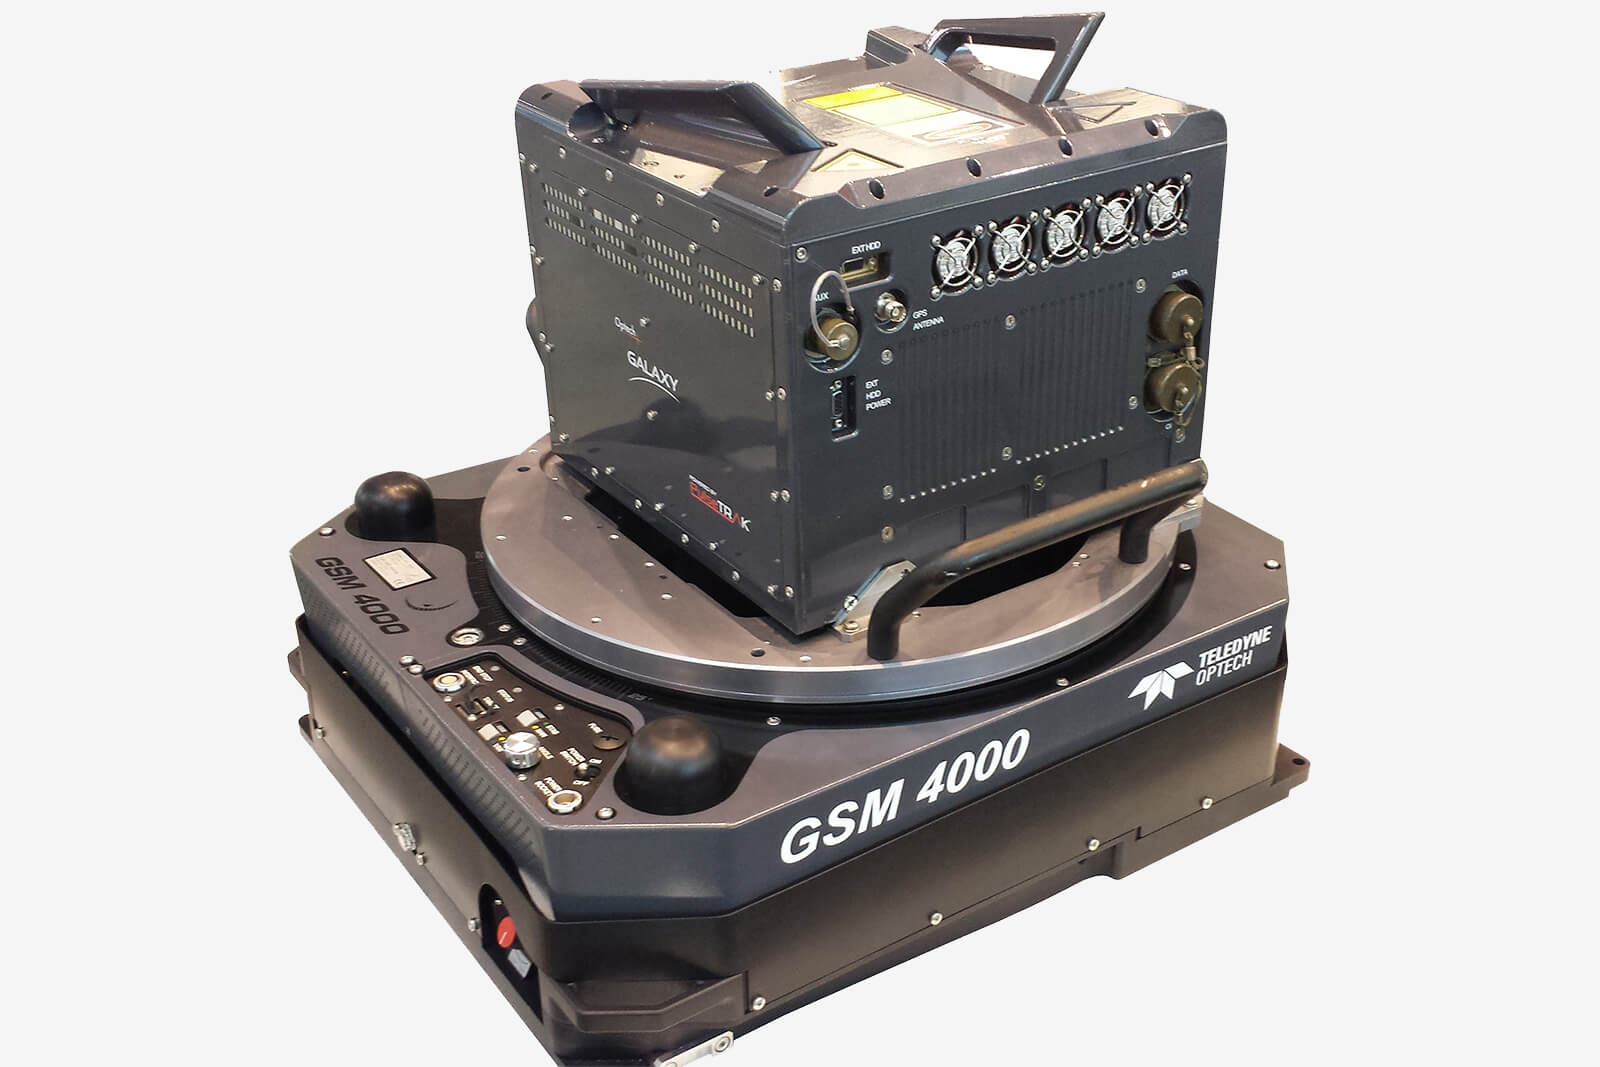 GSM 4000 with Teledyne Optech Galaxy lidar system